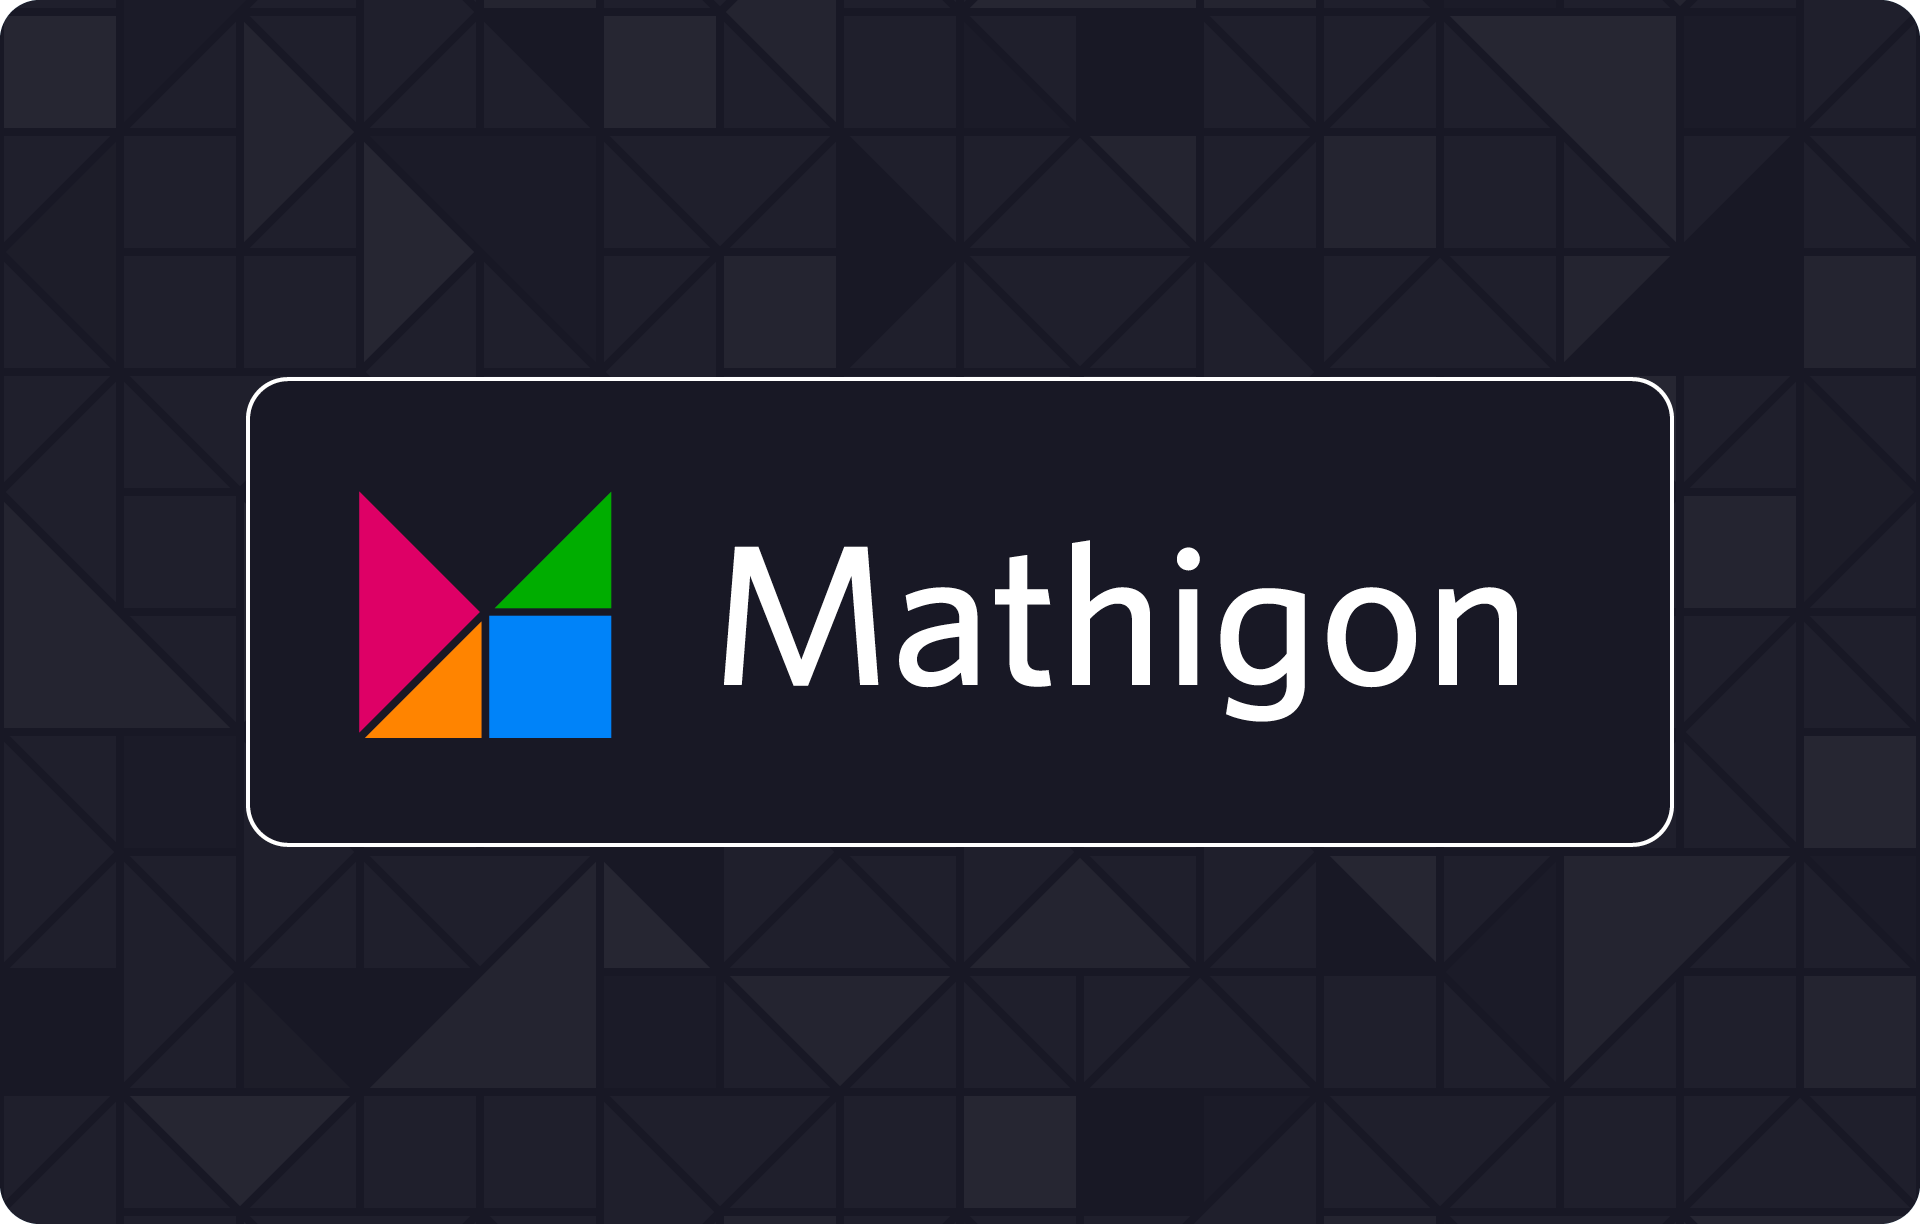 Logo of mathigon on a geometric pattern background, featuring a colorful abstract icon next to the word 